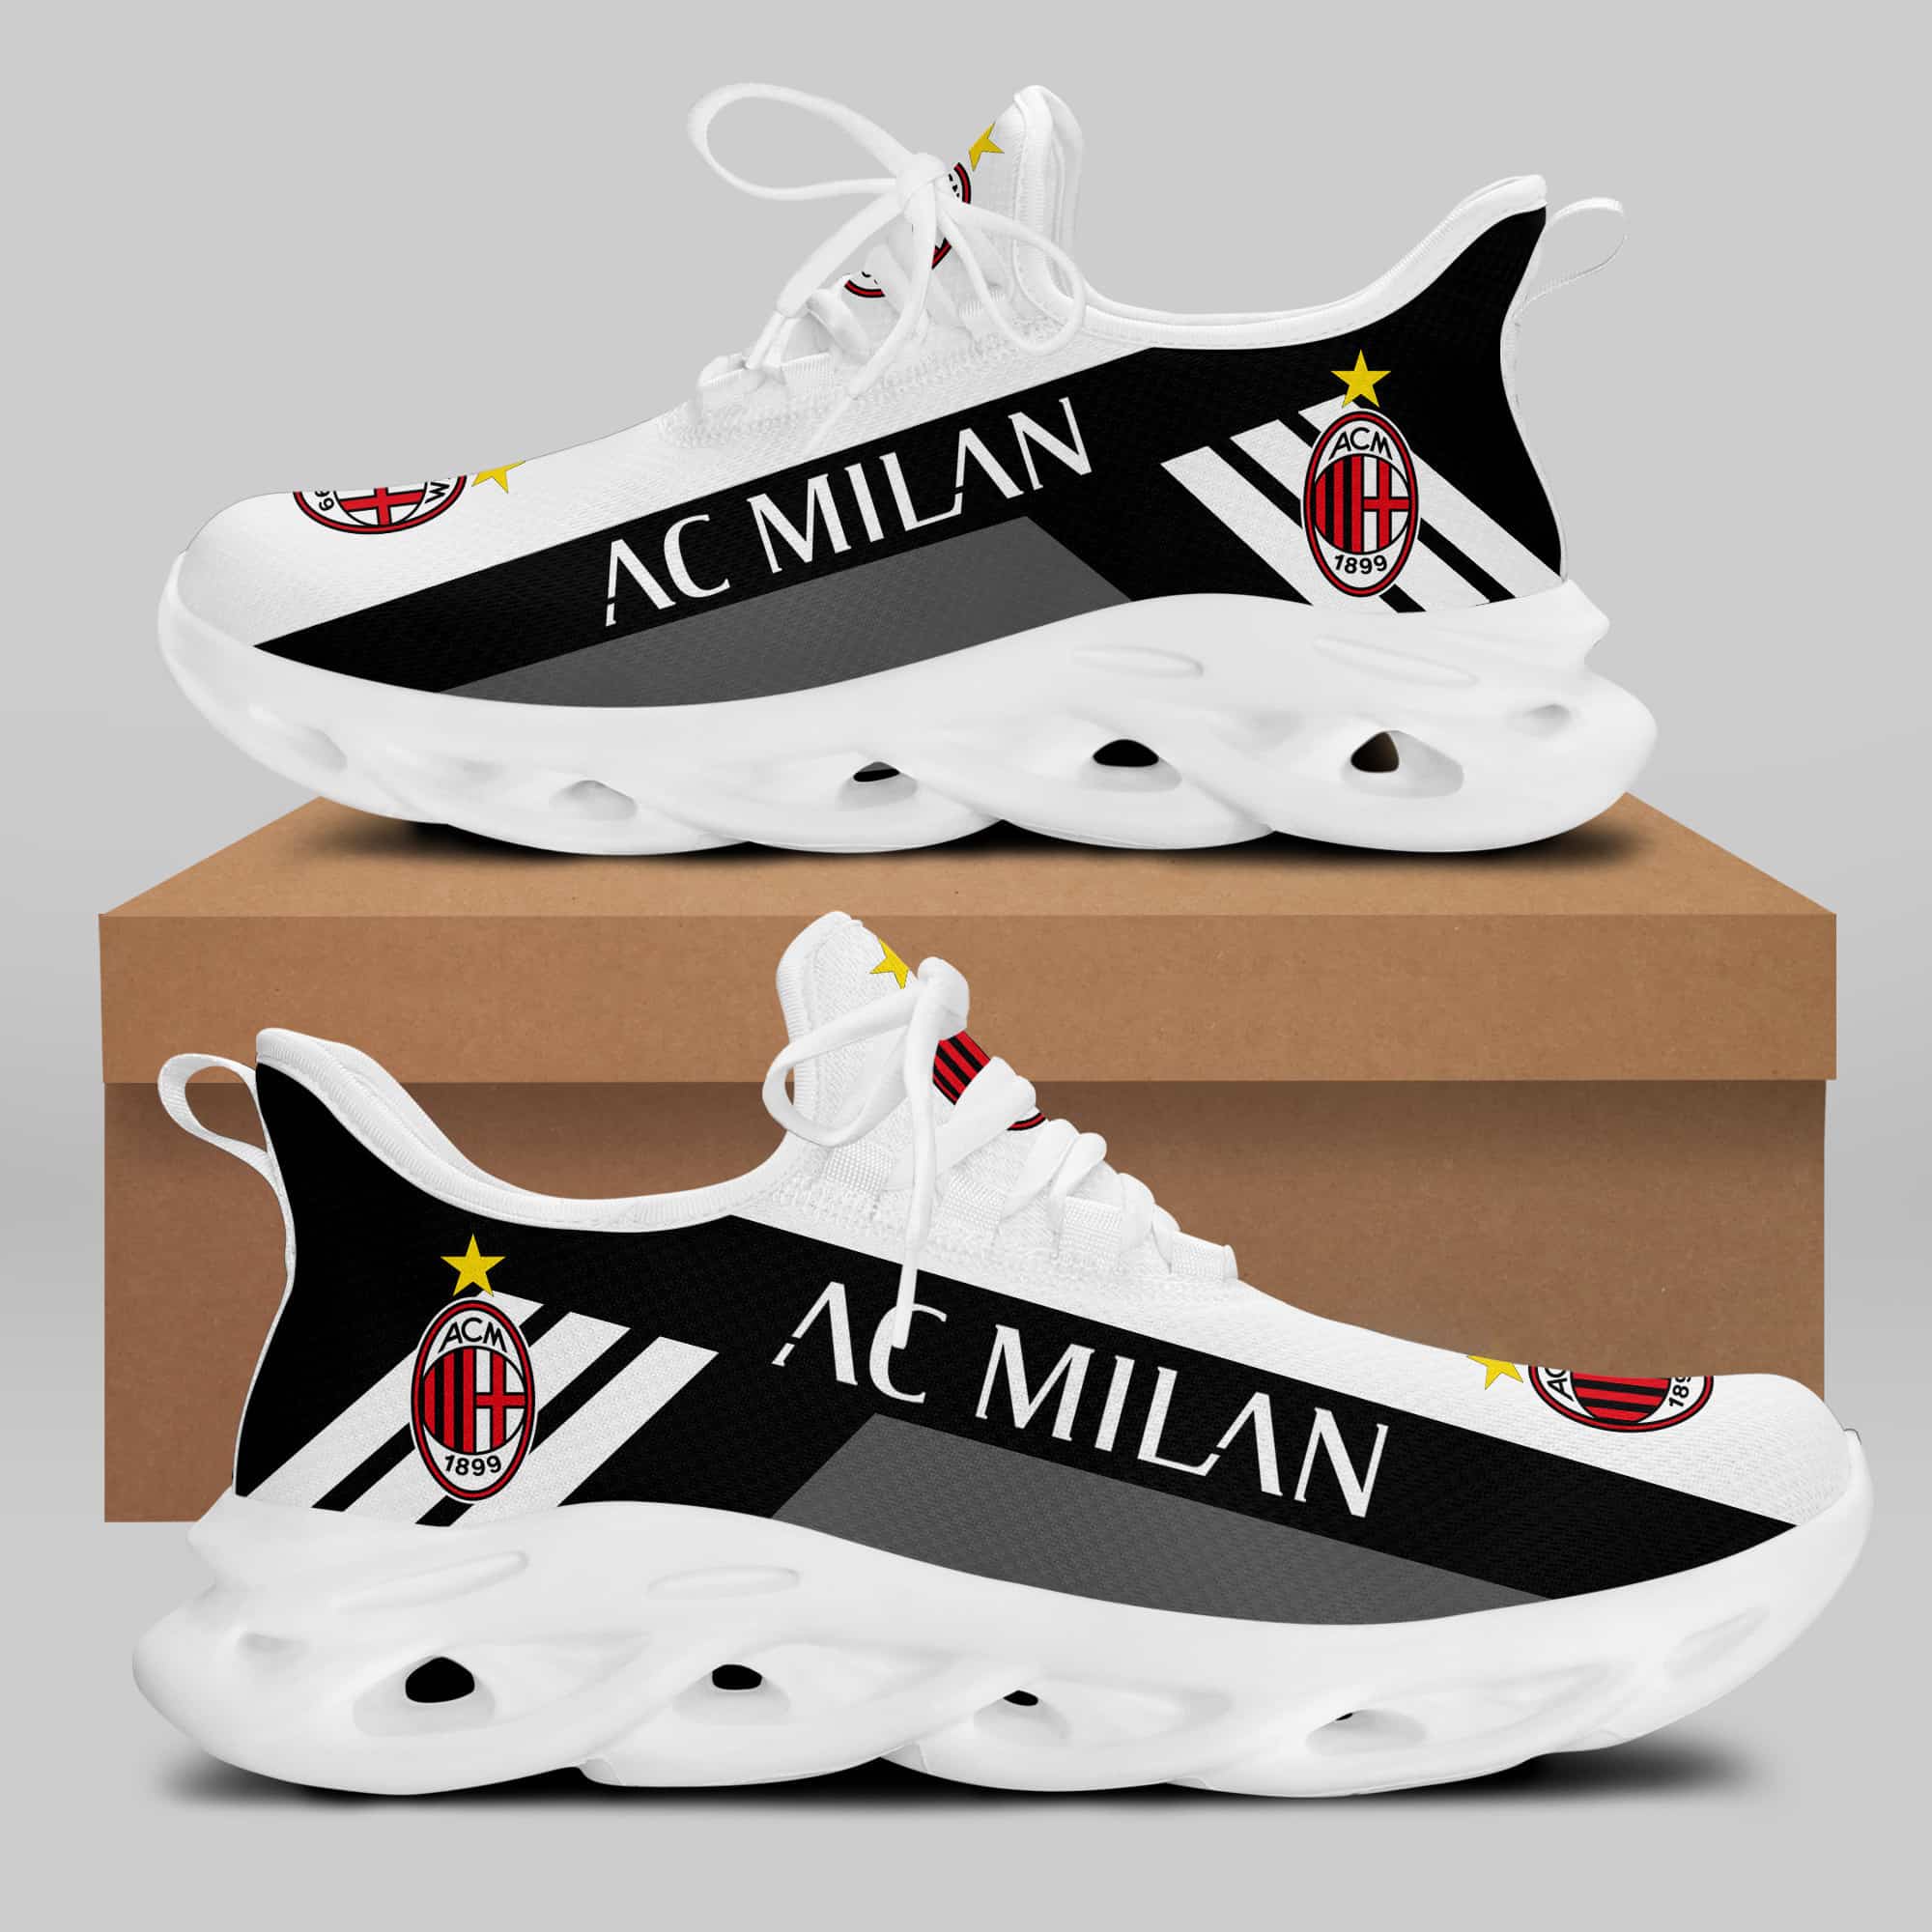 Ac Milan Running Shoes Max Soul Shoes Sneakers Ver 19 1